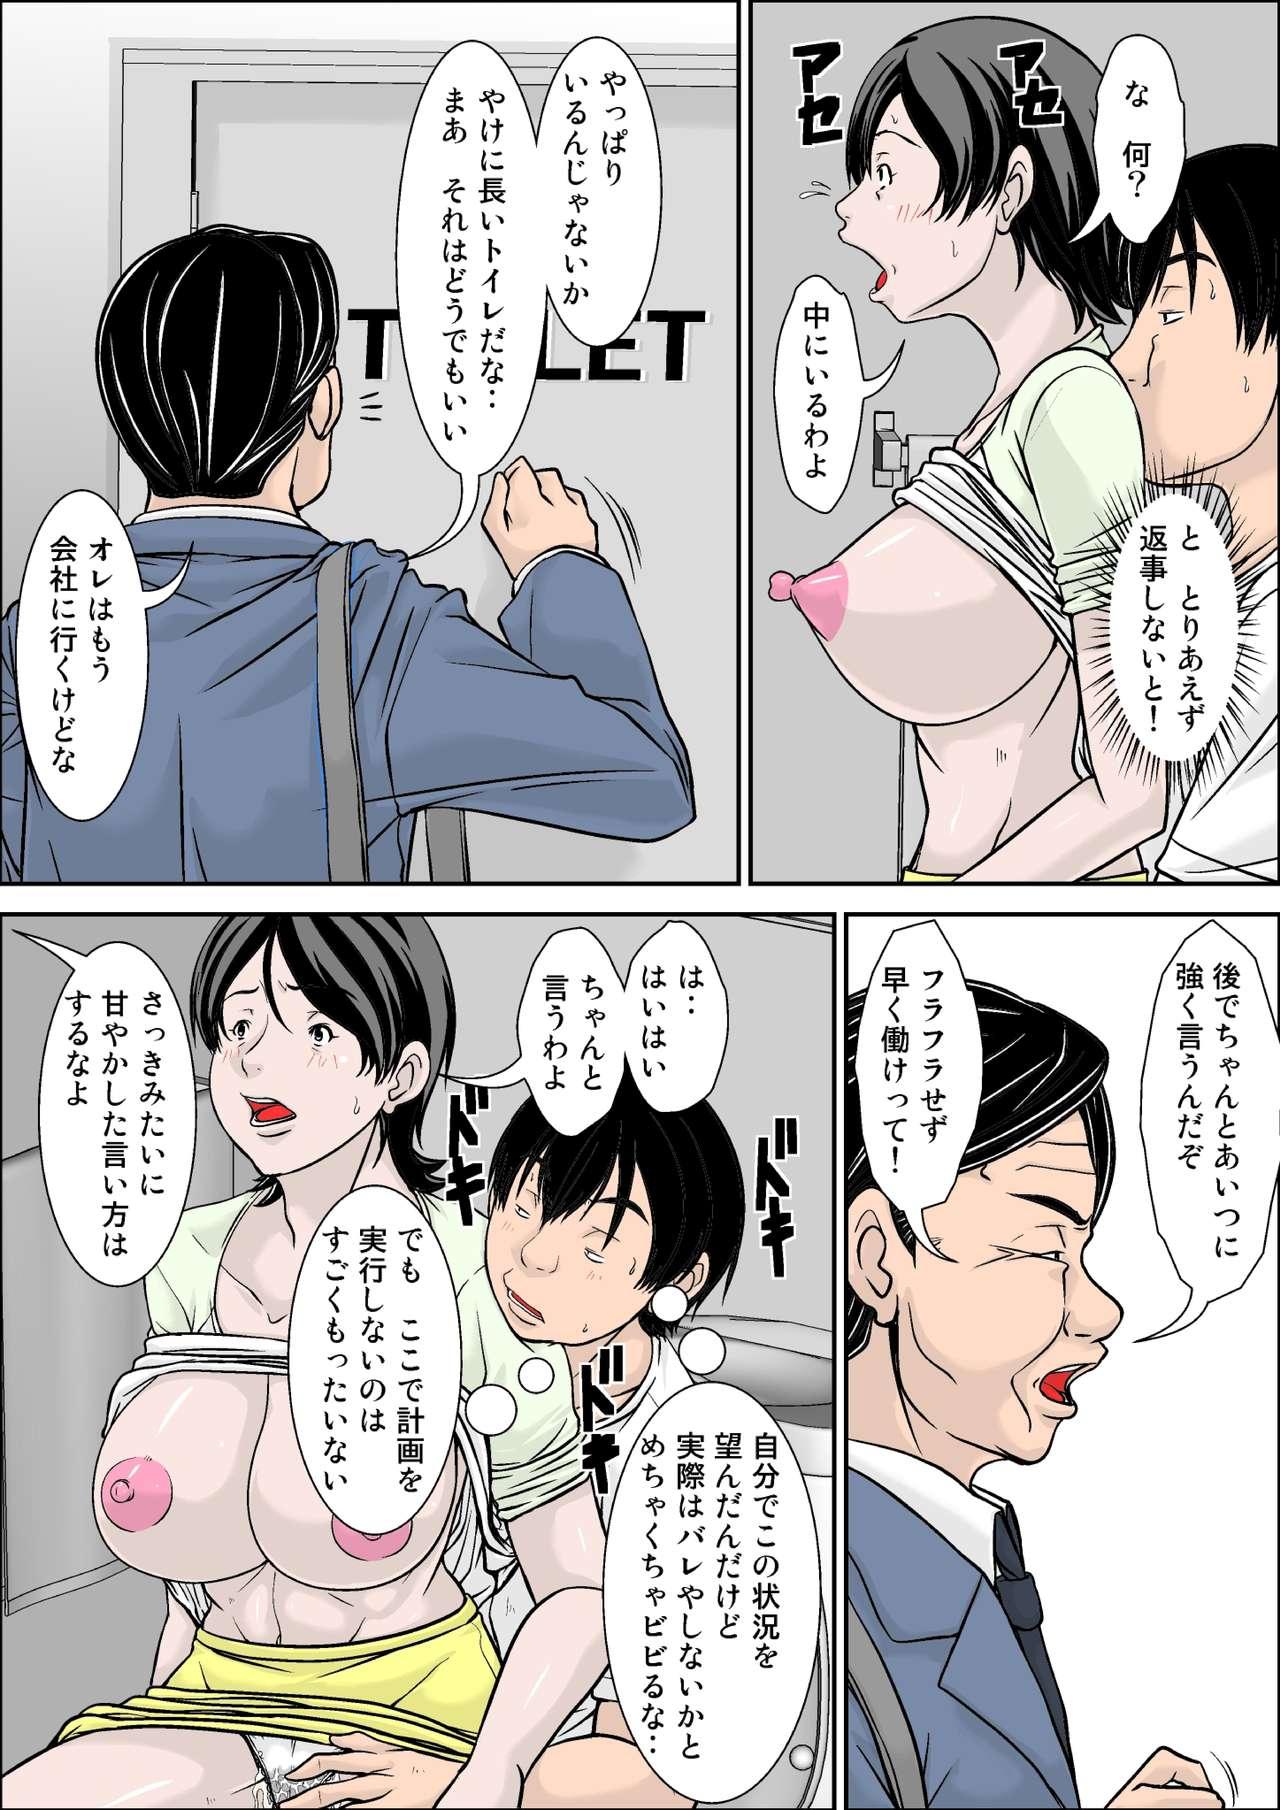 Hey! It is said that I urge you mother and will do what! ... mother Hatsujou - 1st part 27